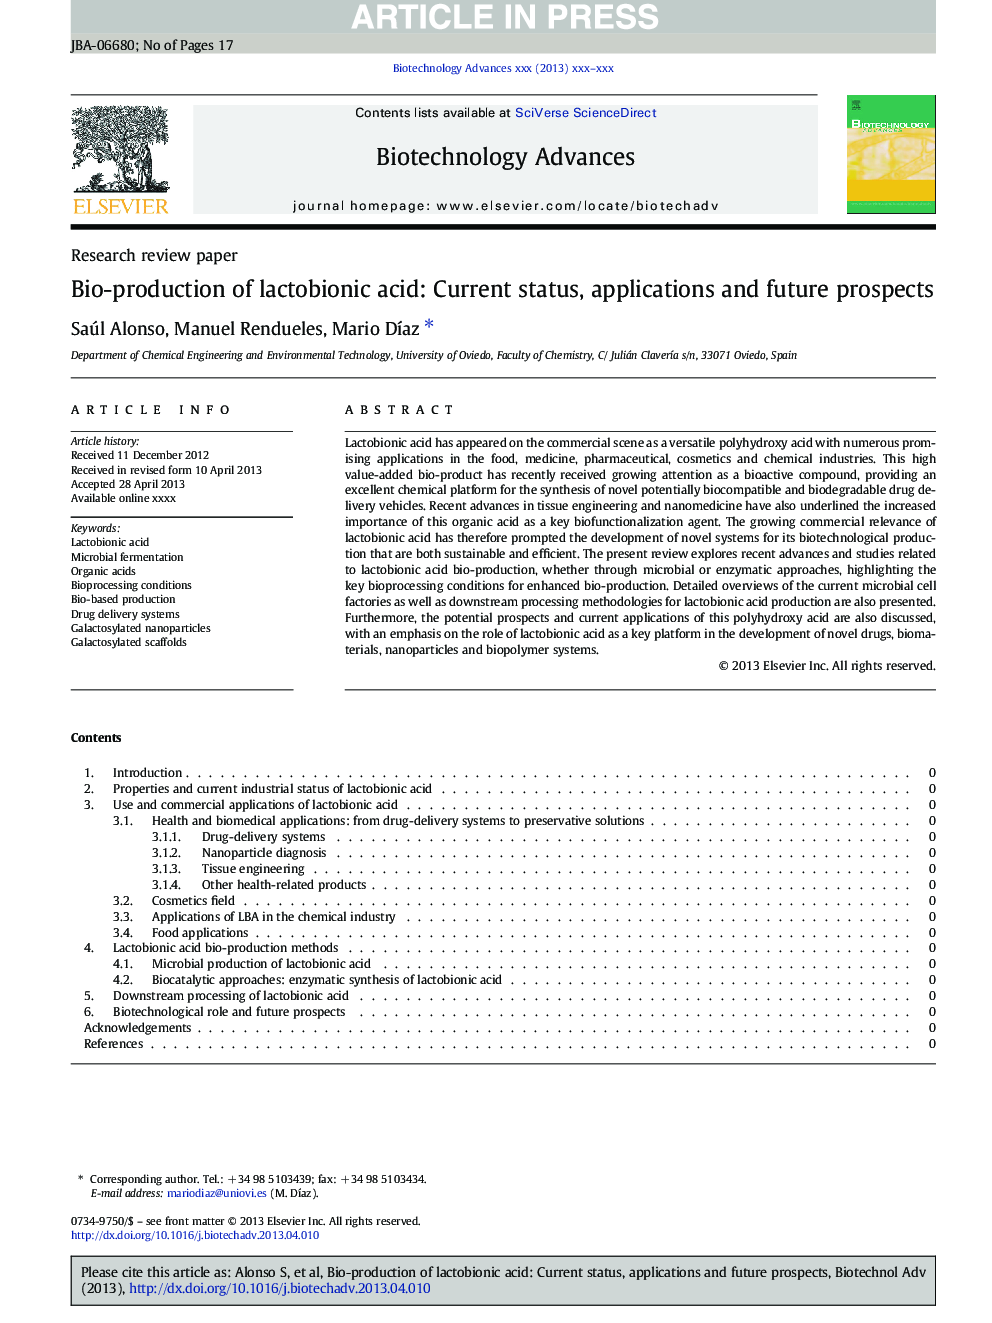 Bio-production of lactobionic acid: Current status, applications and future prospects